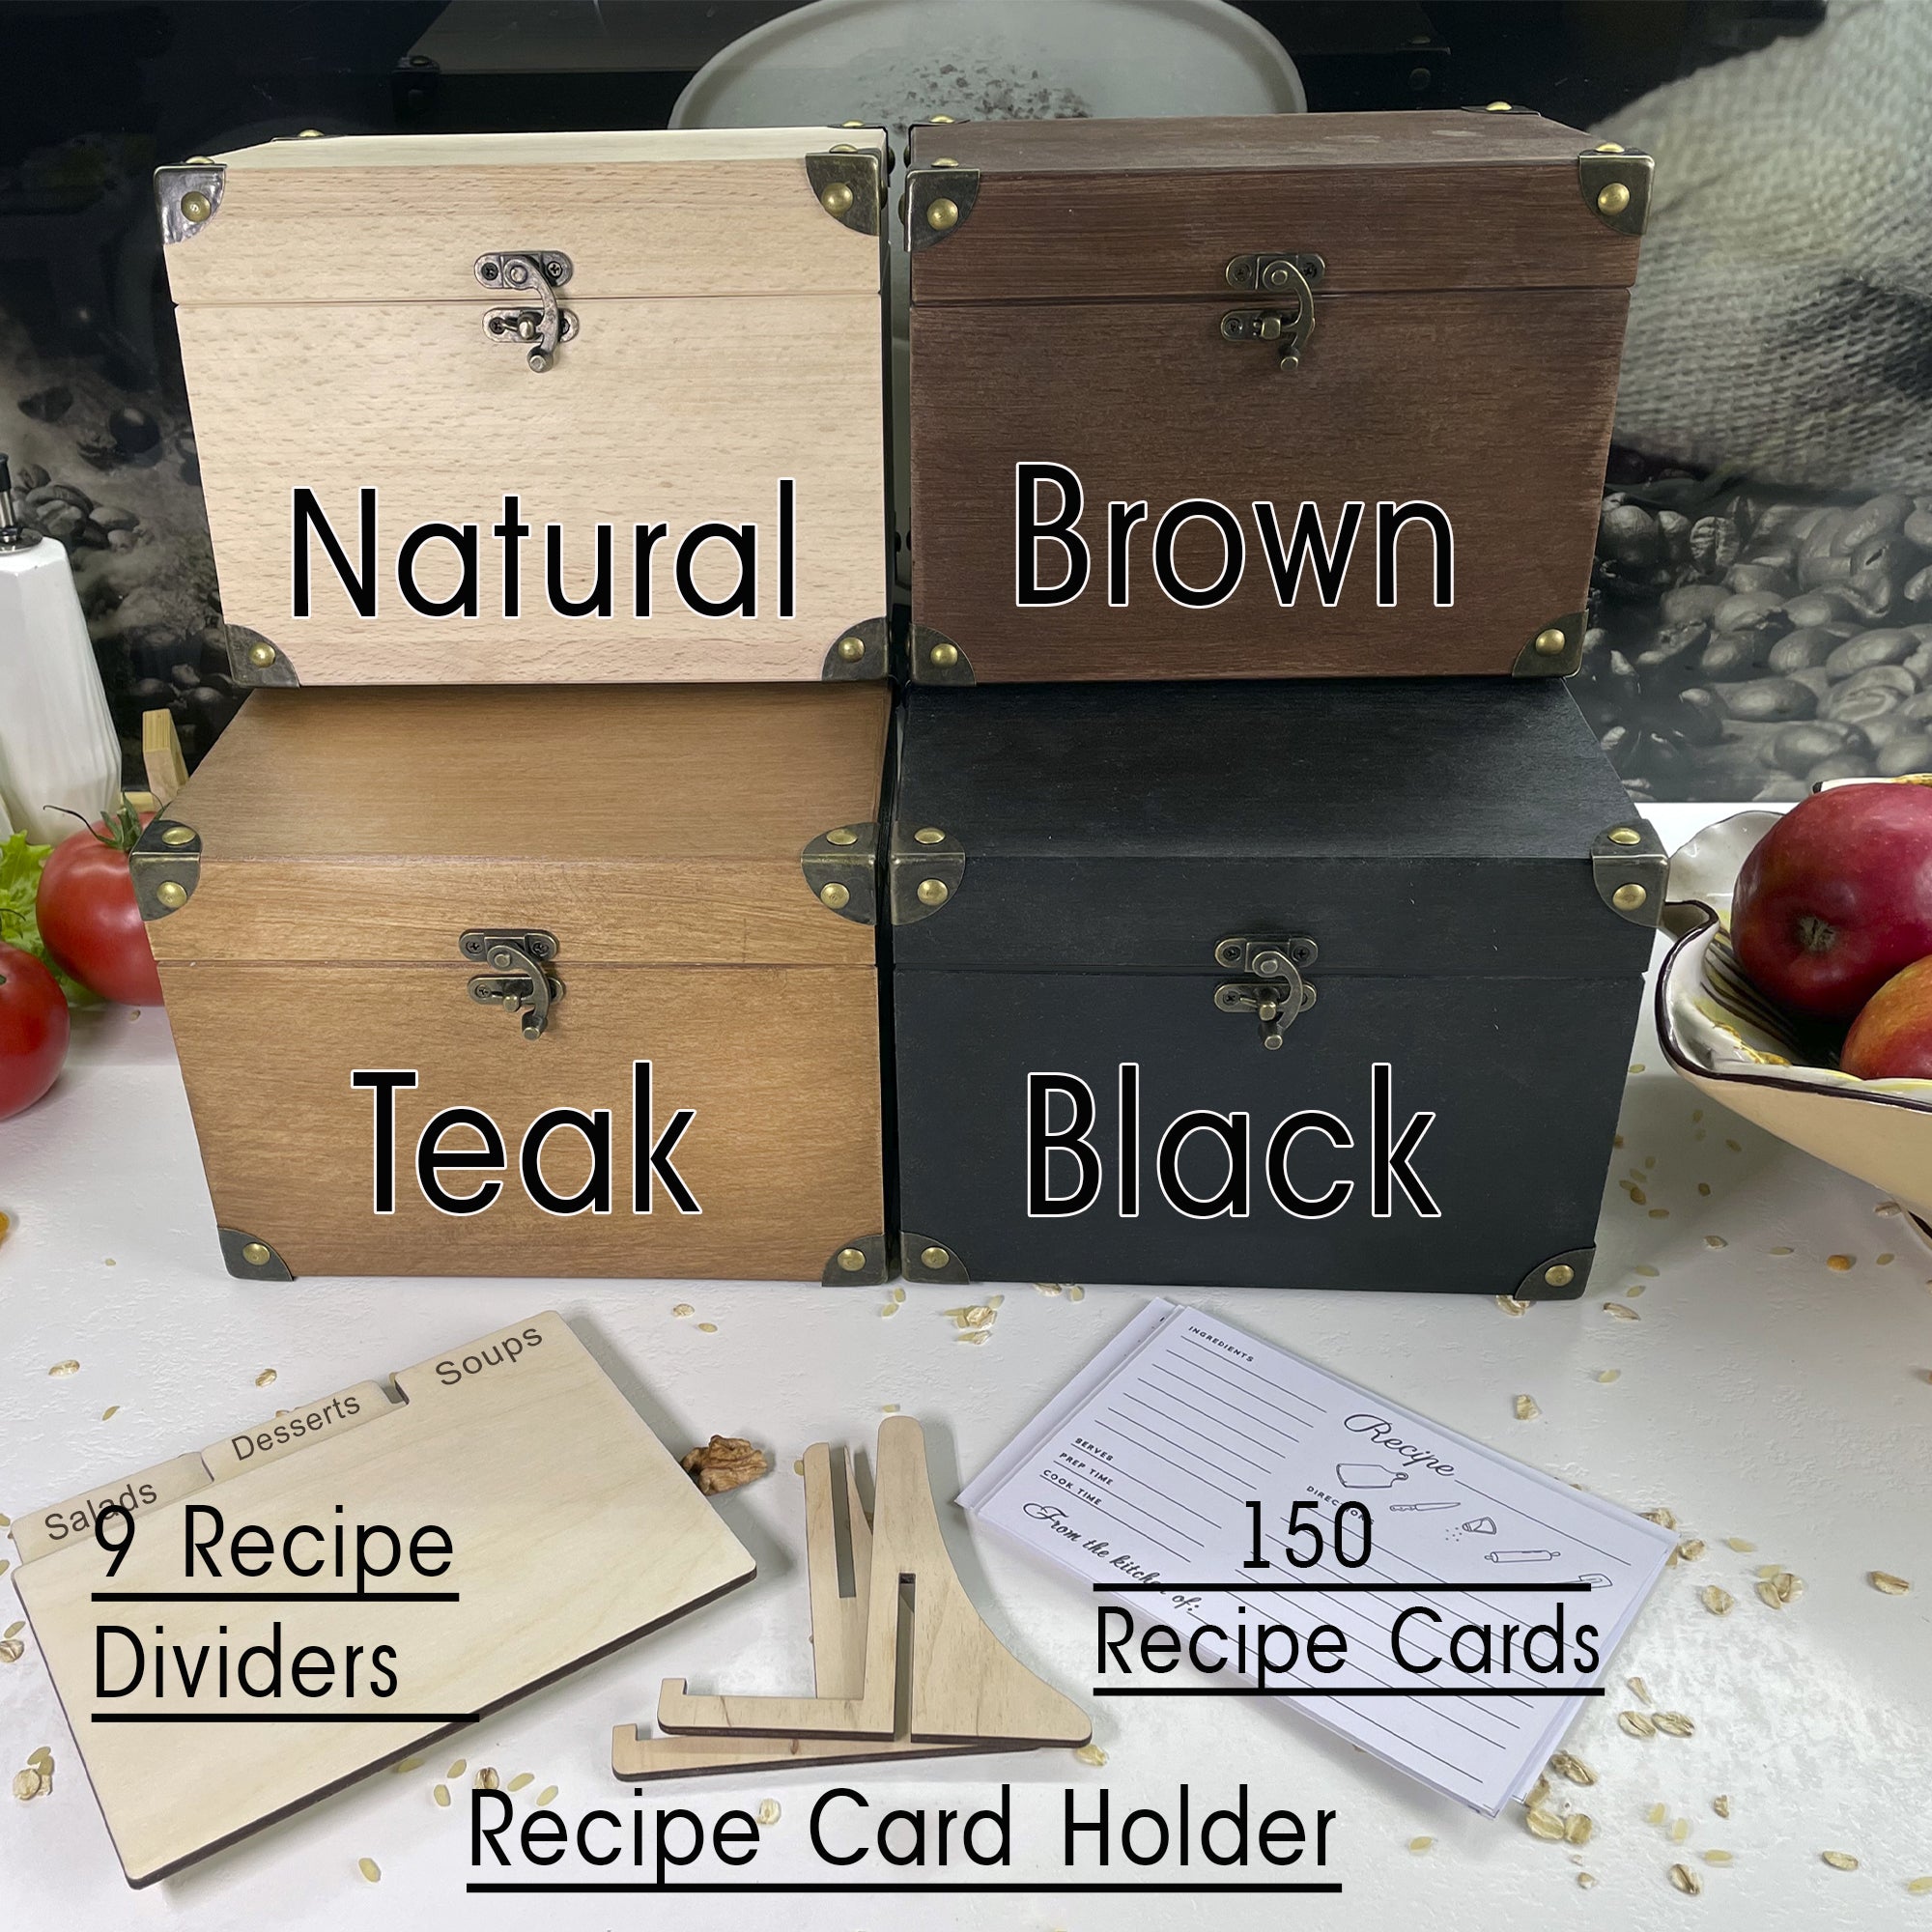 Personalized Recipe Box with Dividers and Cards Love Recipes engraving